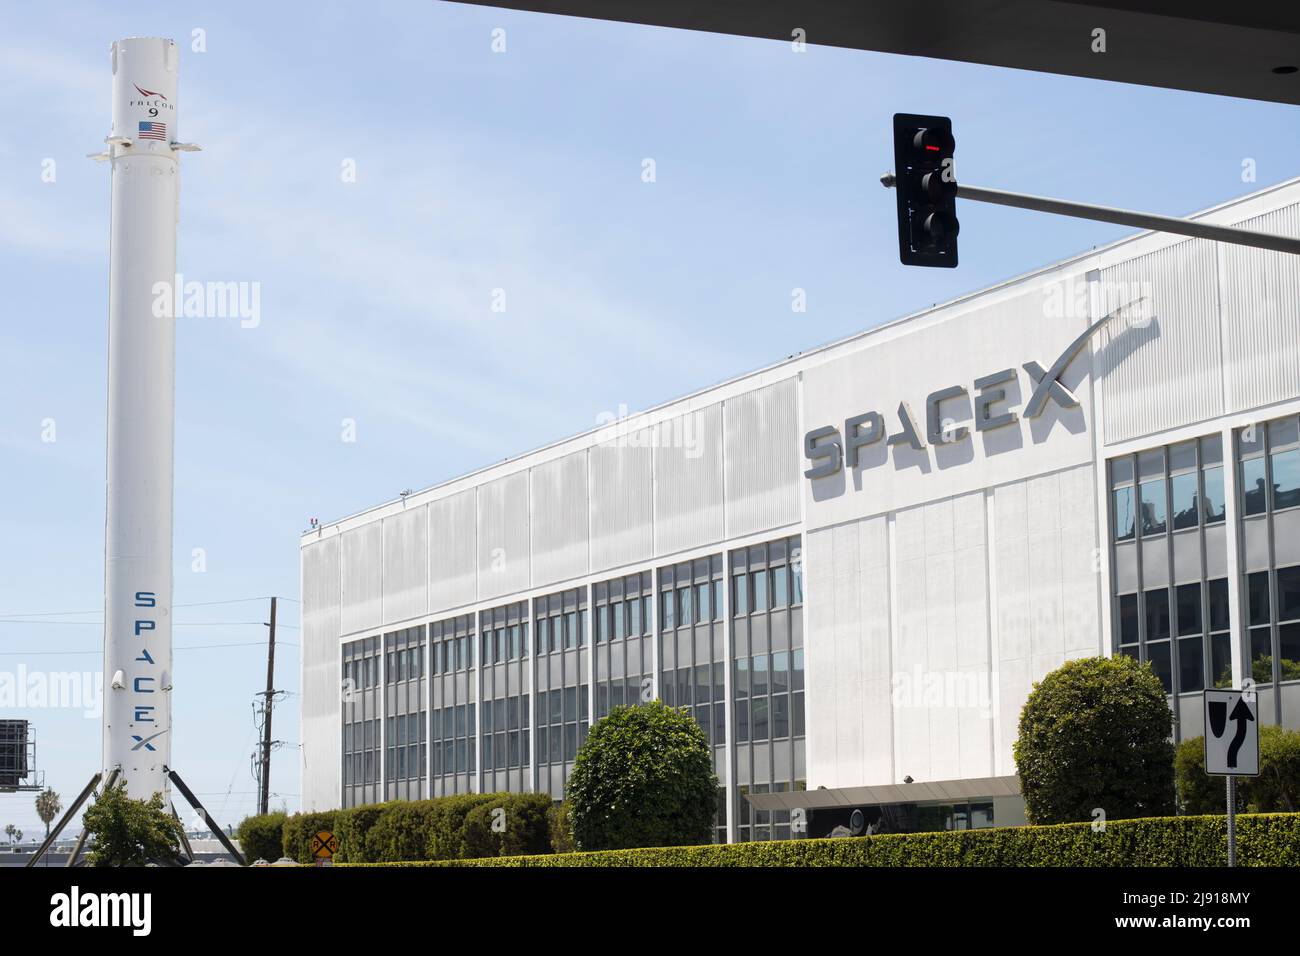 Exterior view of the SpaceX headquarters with recovered Falcon 9 rocket booster on display in Hawthorne, California, seen on Tuesday, May 10, 2022. Stock Photo